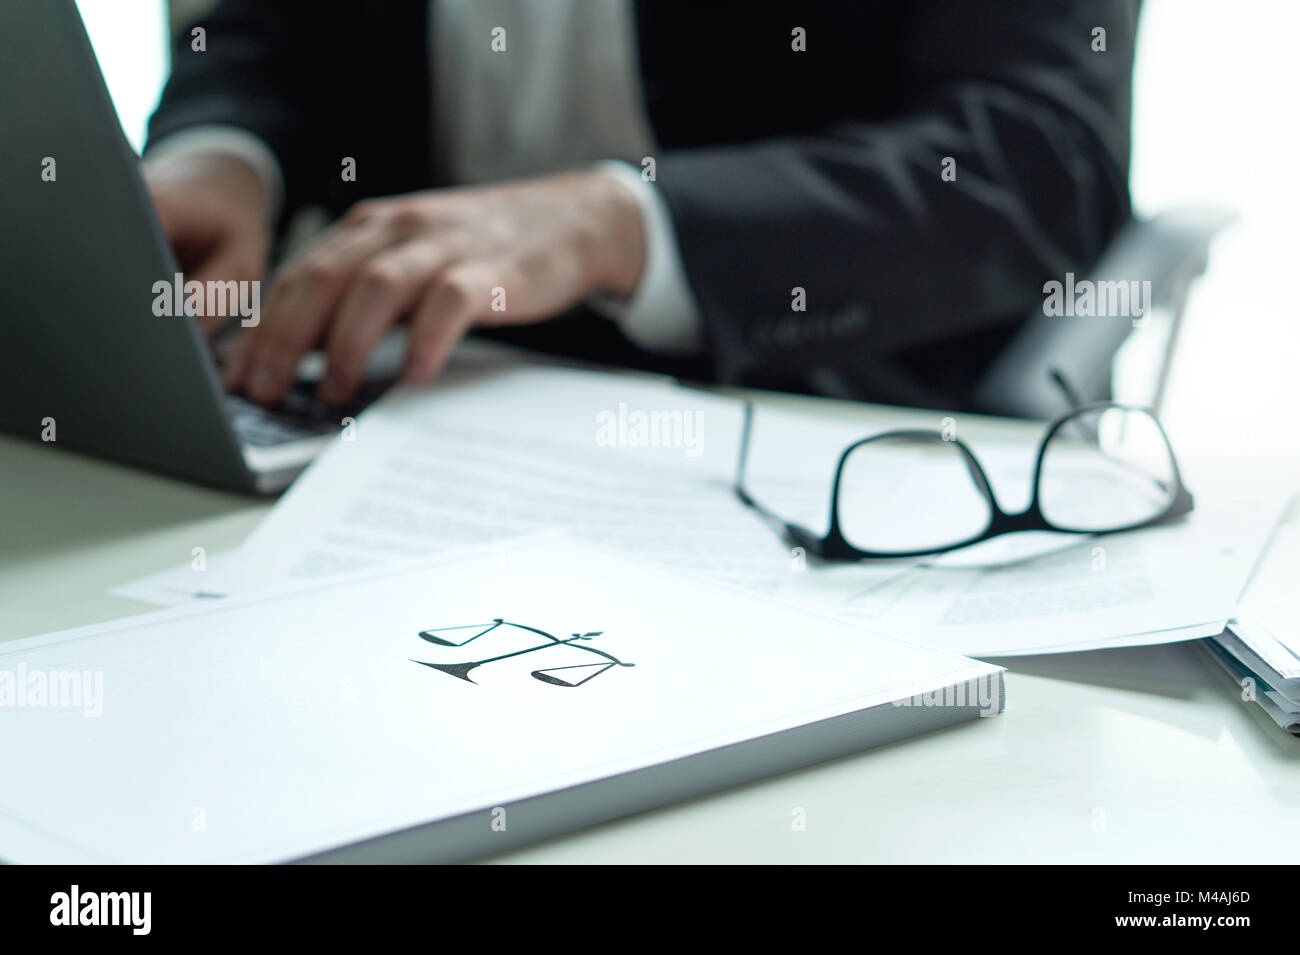 Lawyer working in office. Attorney writing a legal document with laptop computer. Glasses on table. Pile of paper with scale and justice symbol. Stock Photo